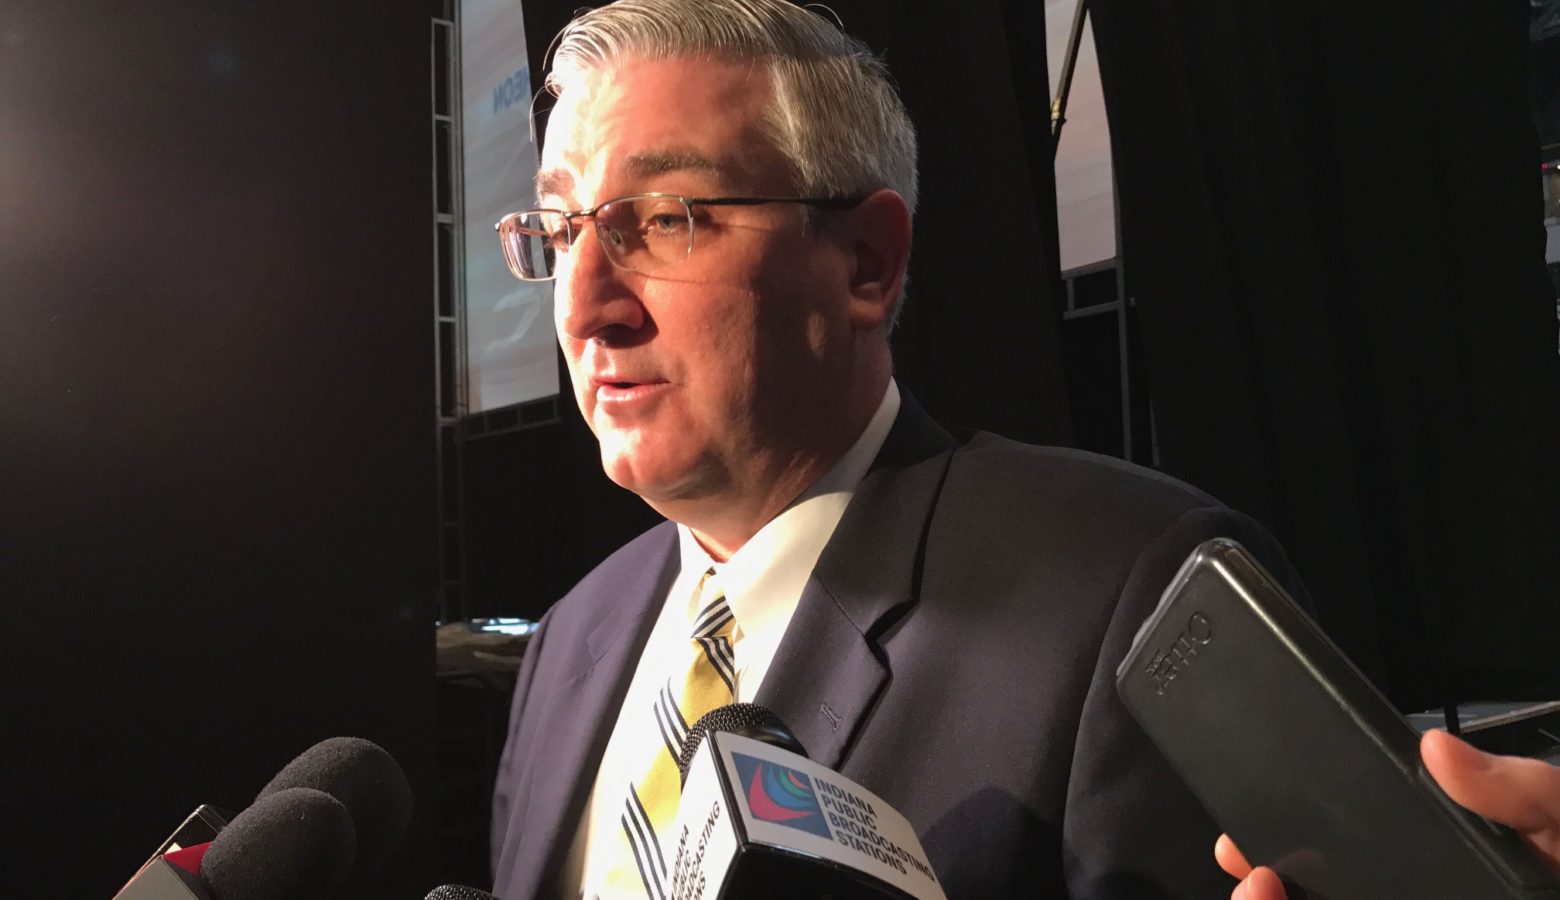 Gov. Eric Holcomb (R-Indiana) says changes to the federal health care bill helped fuel his support. (Brandon Smith/IPB News)